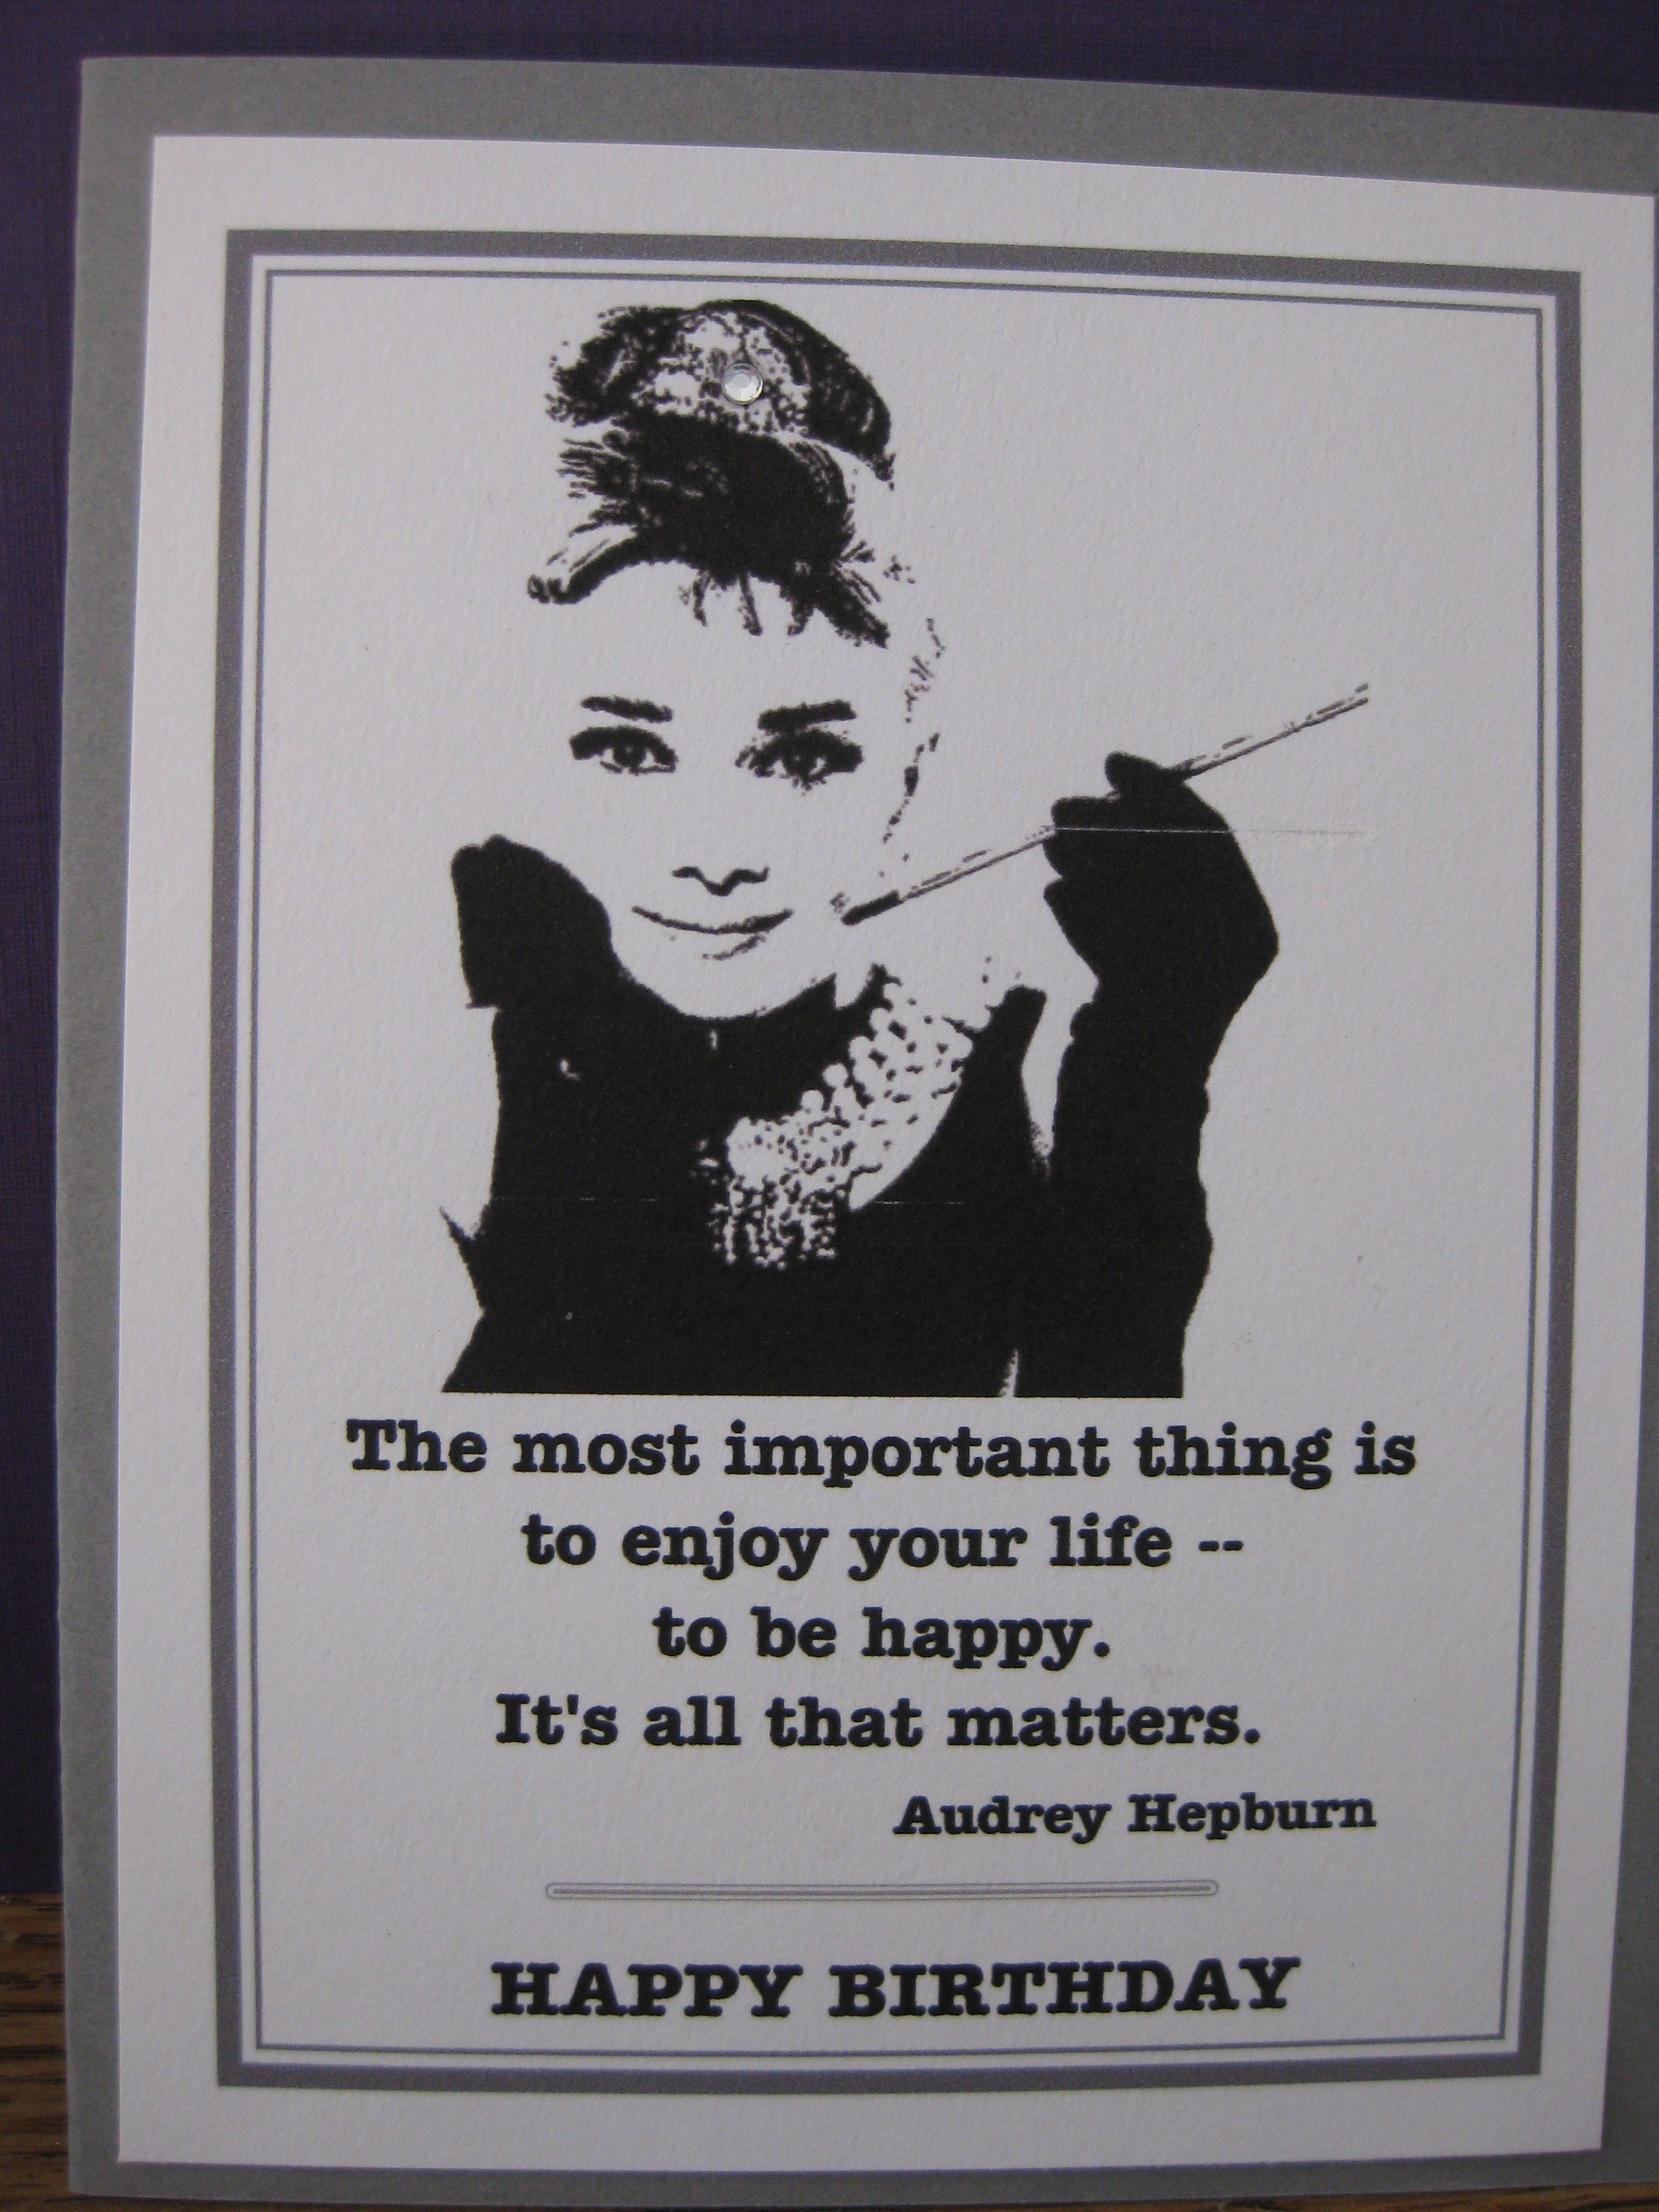 the most important thing/Audrey Hepburn